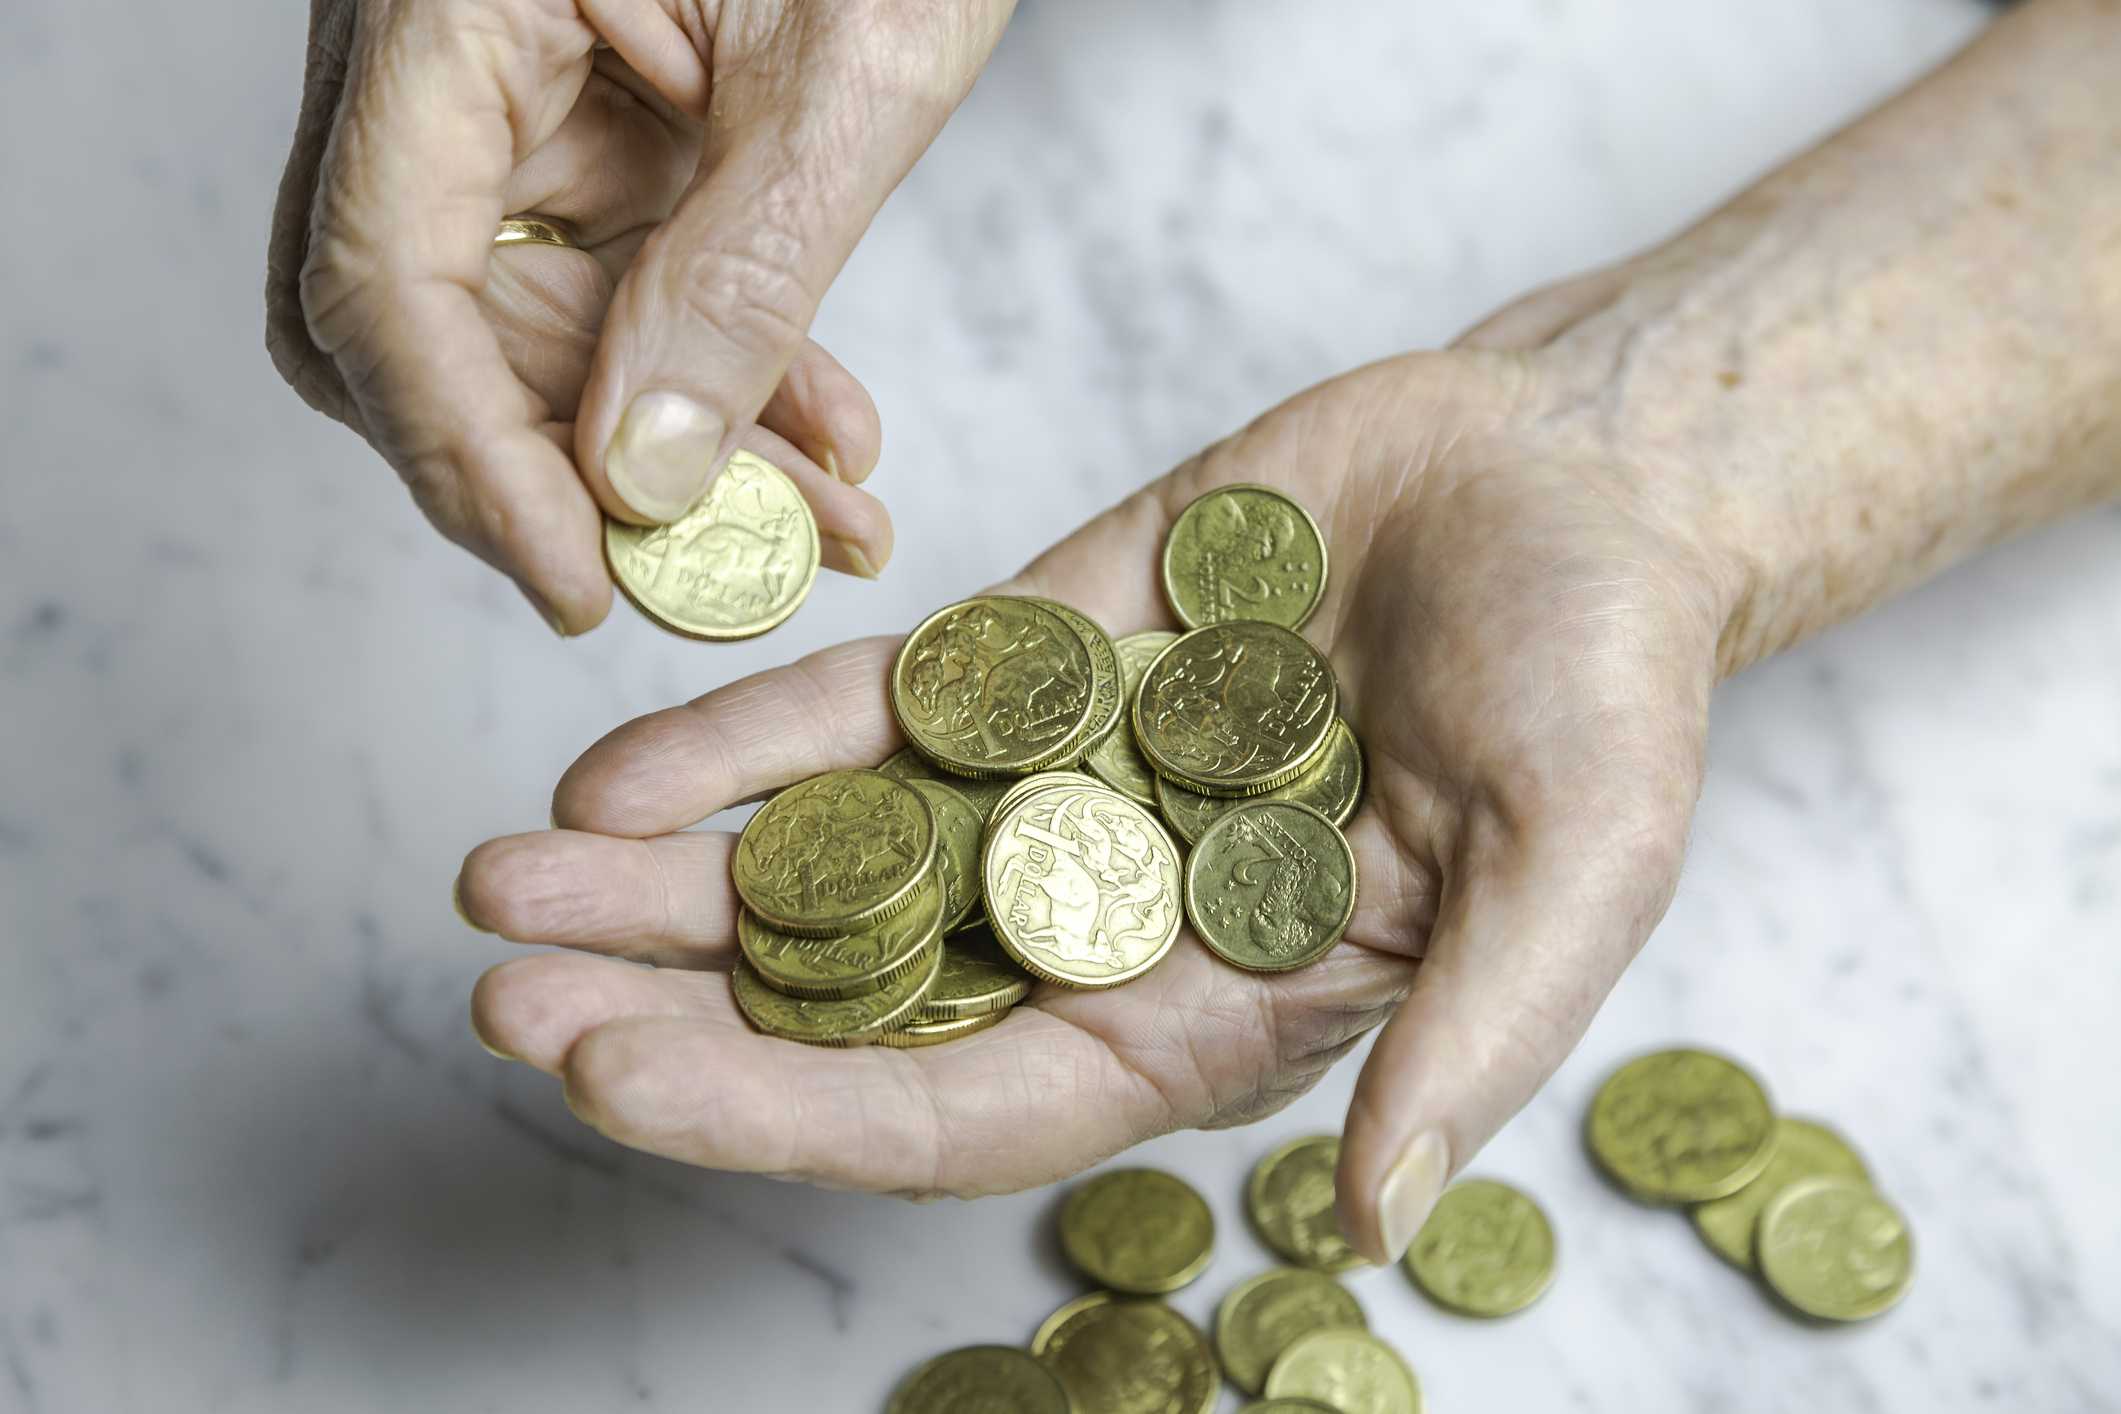 How your loose change can go a long way for struggling Australians